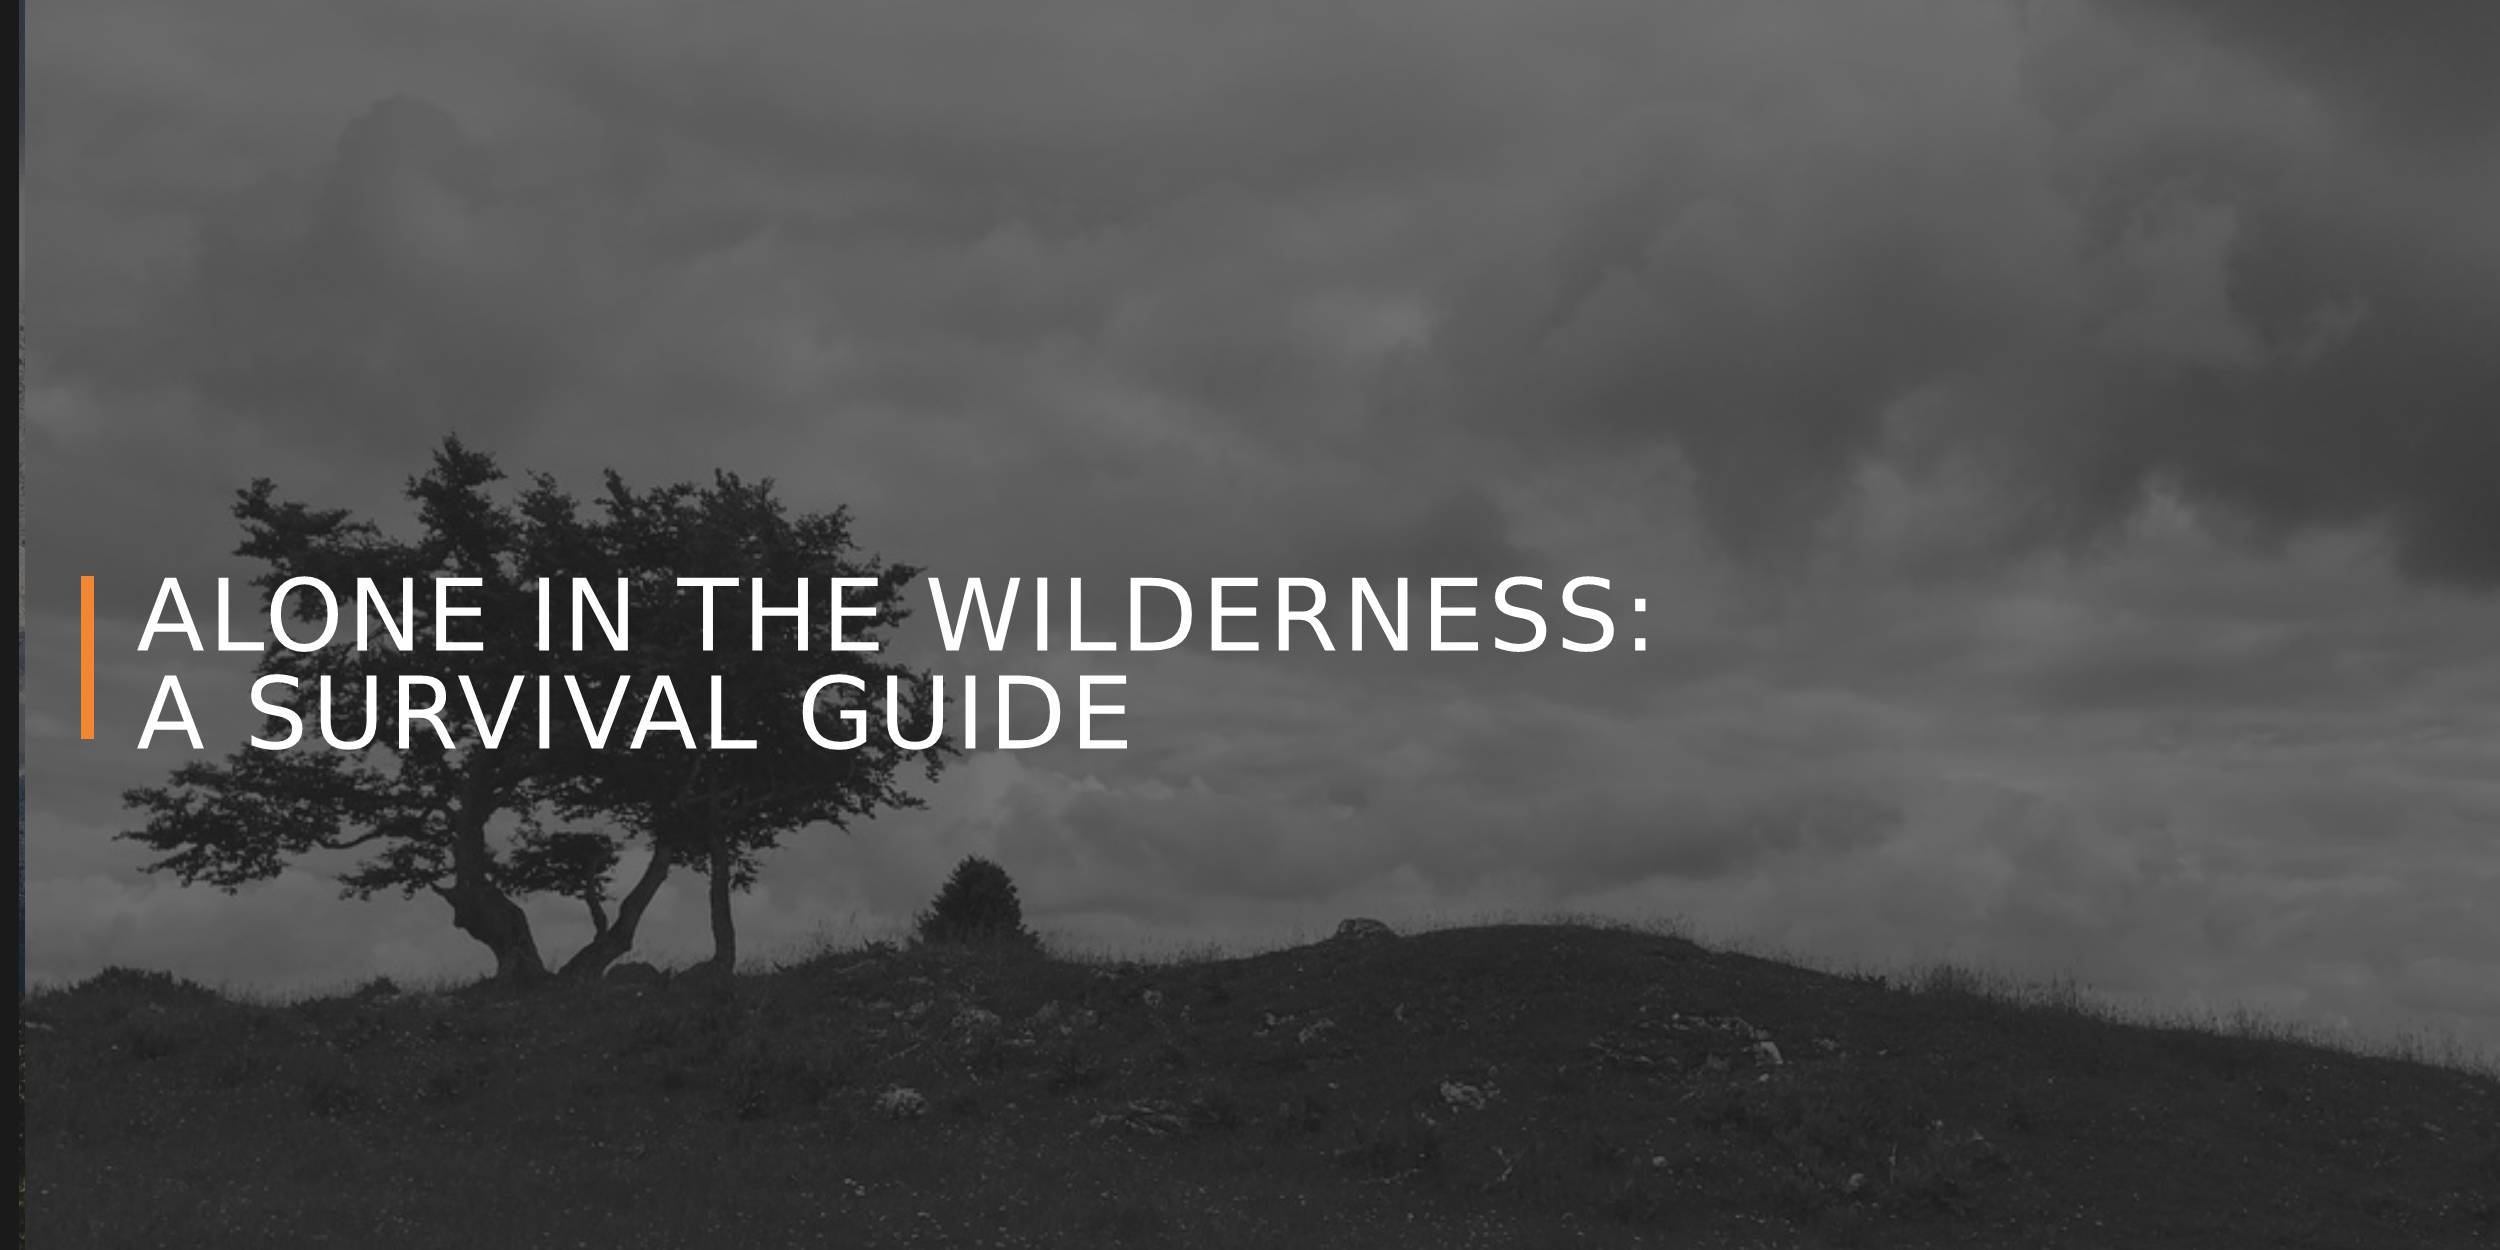 Alone in the Wilderness: A Survival Guide